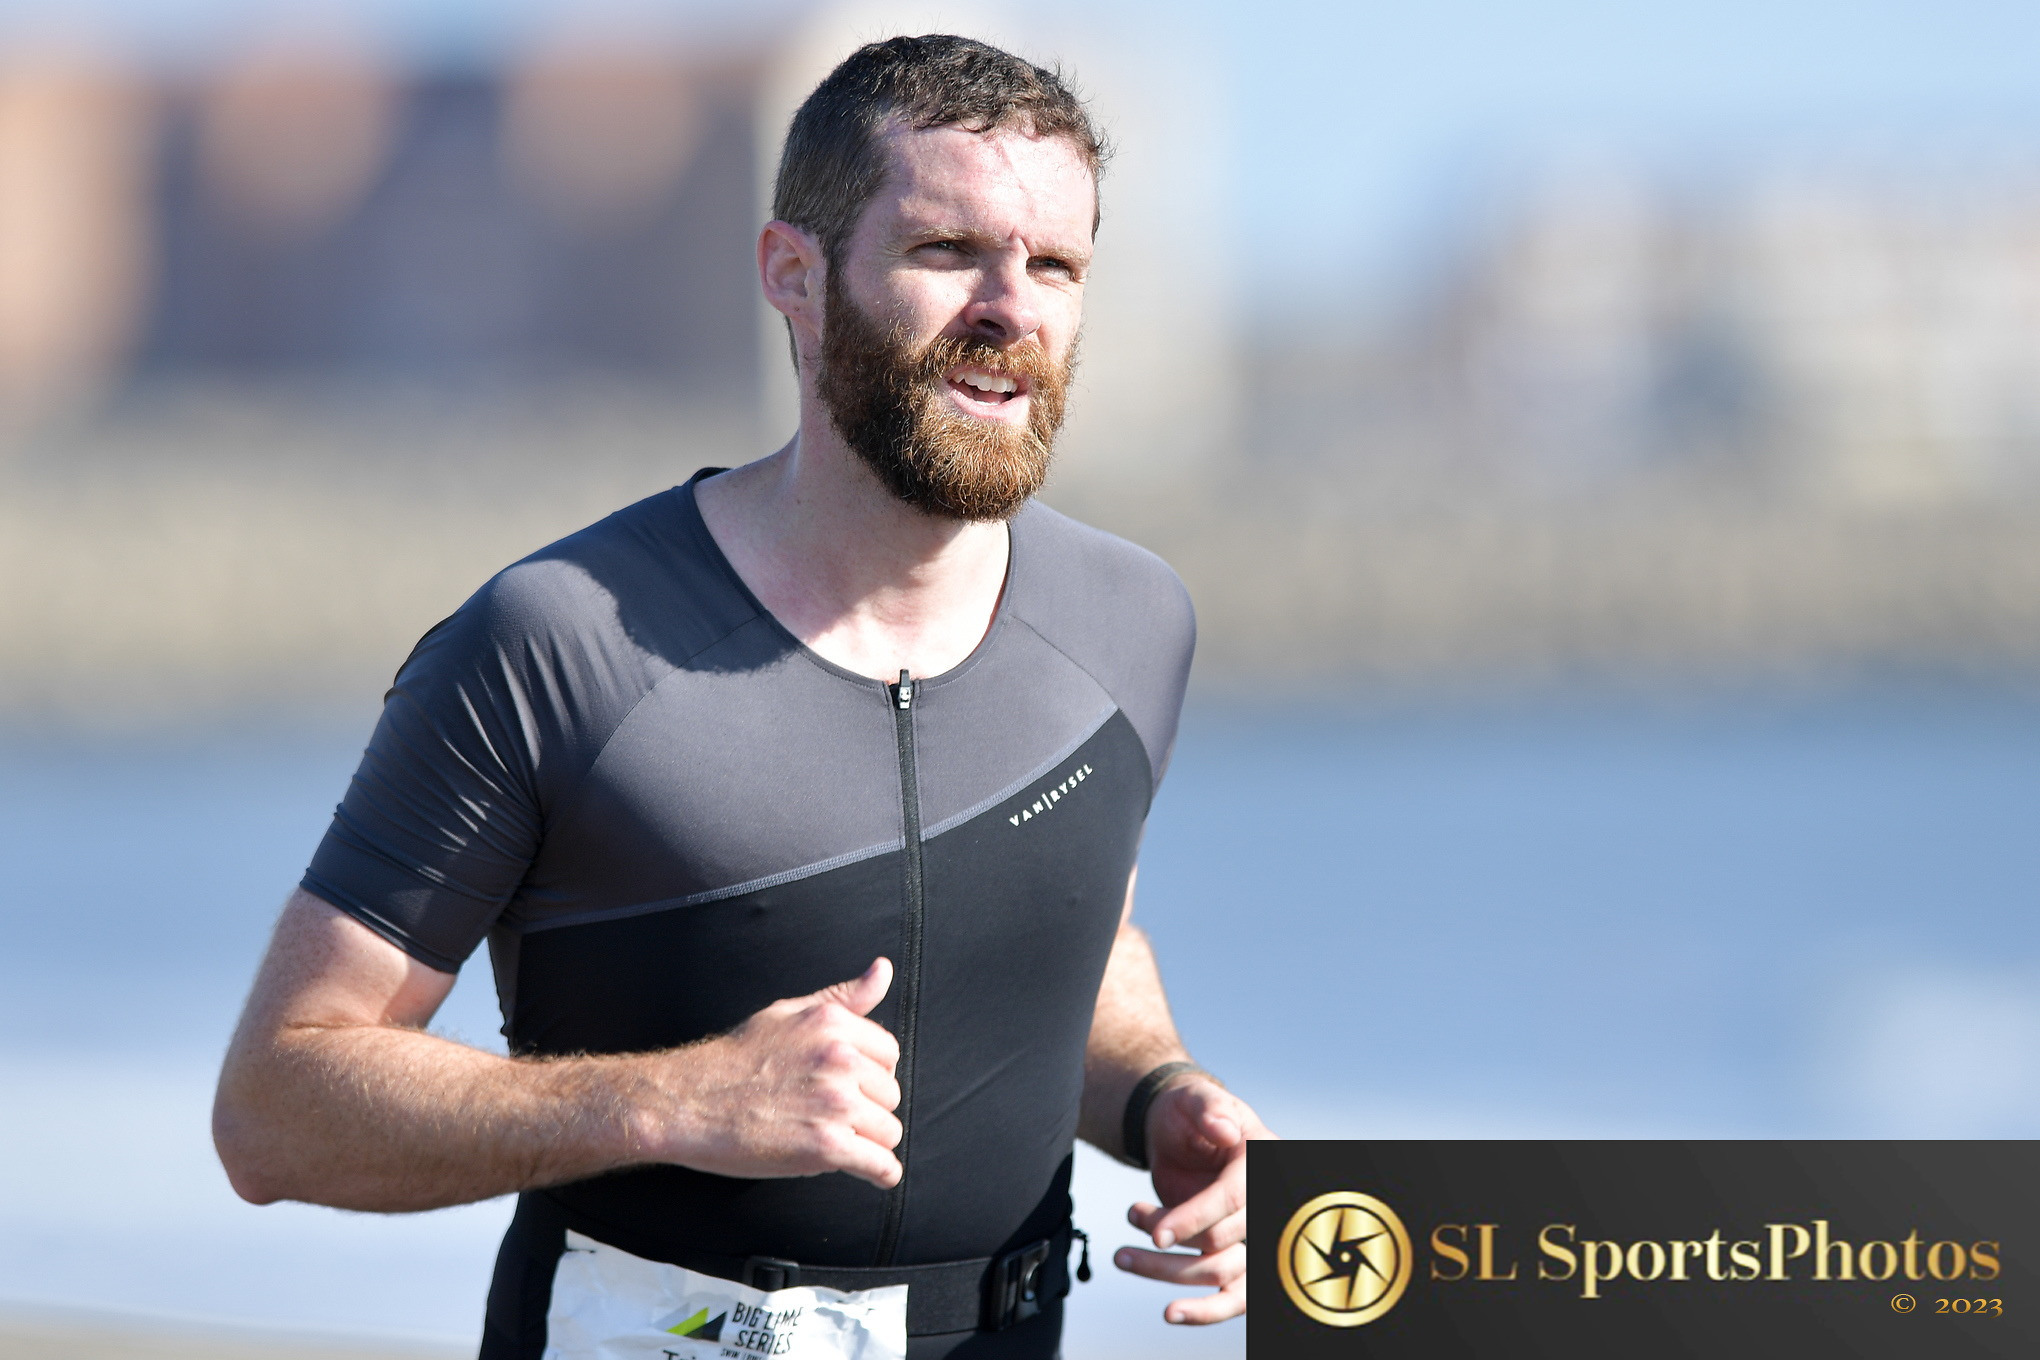 Mid-stride at the Big Lime triathlon, wearing a tight tri suit and an extremely pained expression